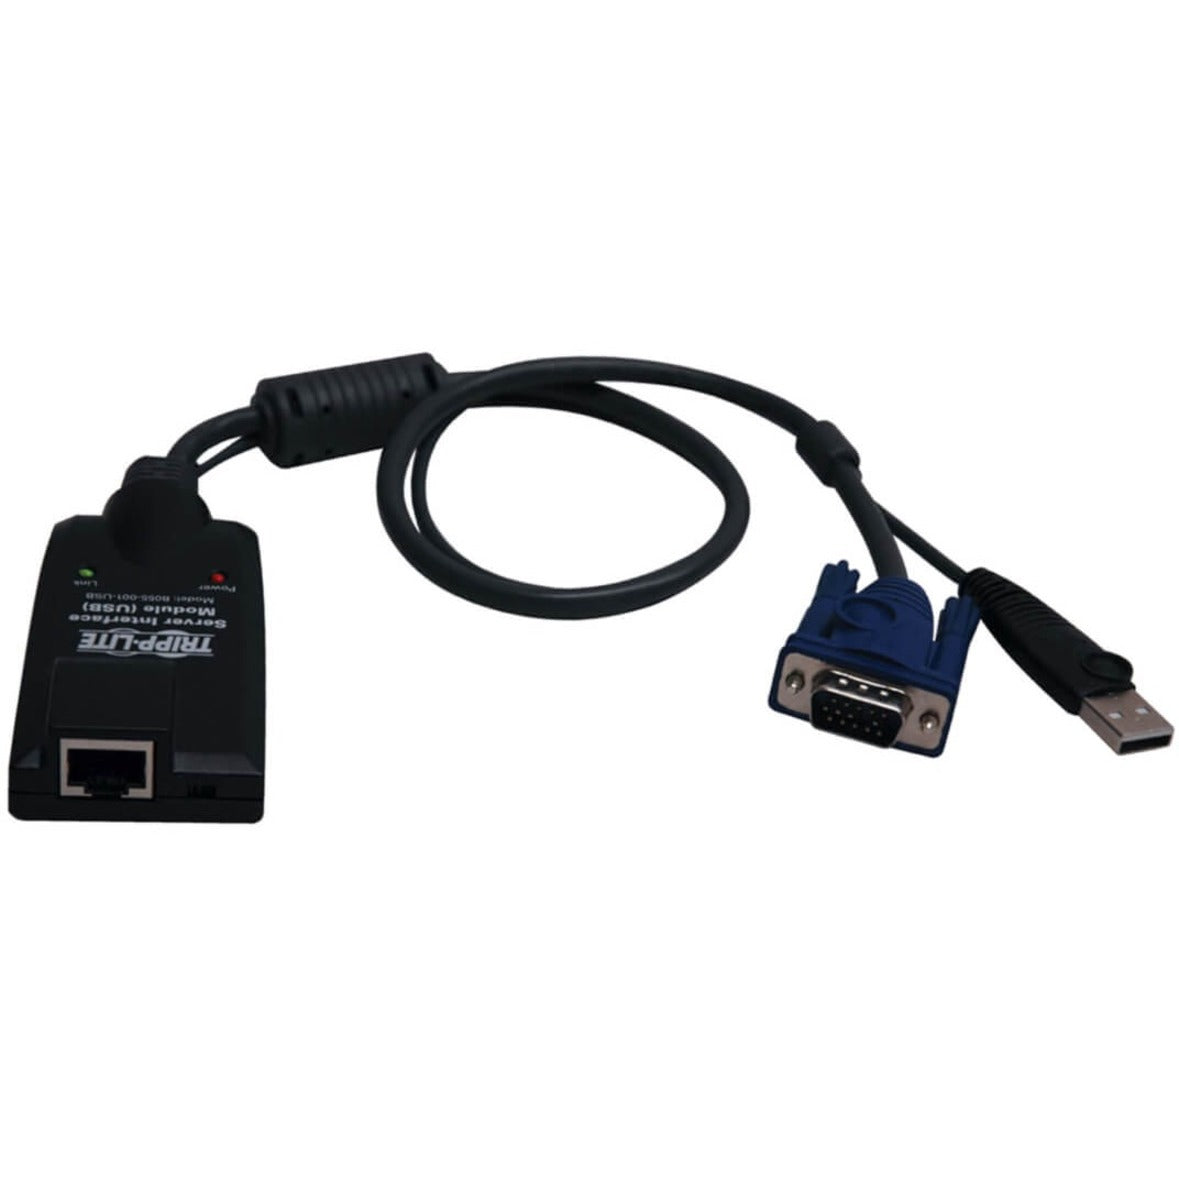 Tripp Lite B055-001-USB-V2 NetDirector Server Interface Module Cable Adapter Data Transfer Cable